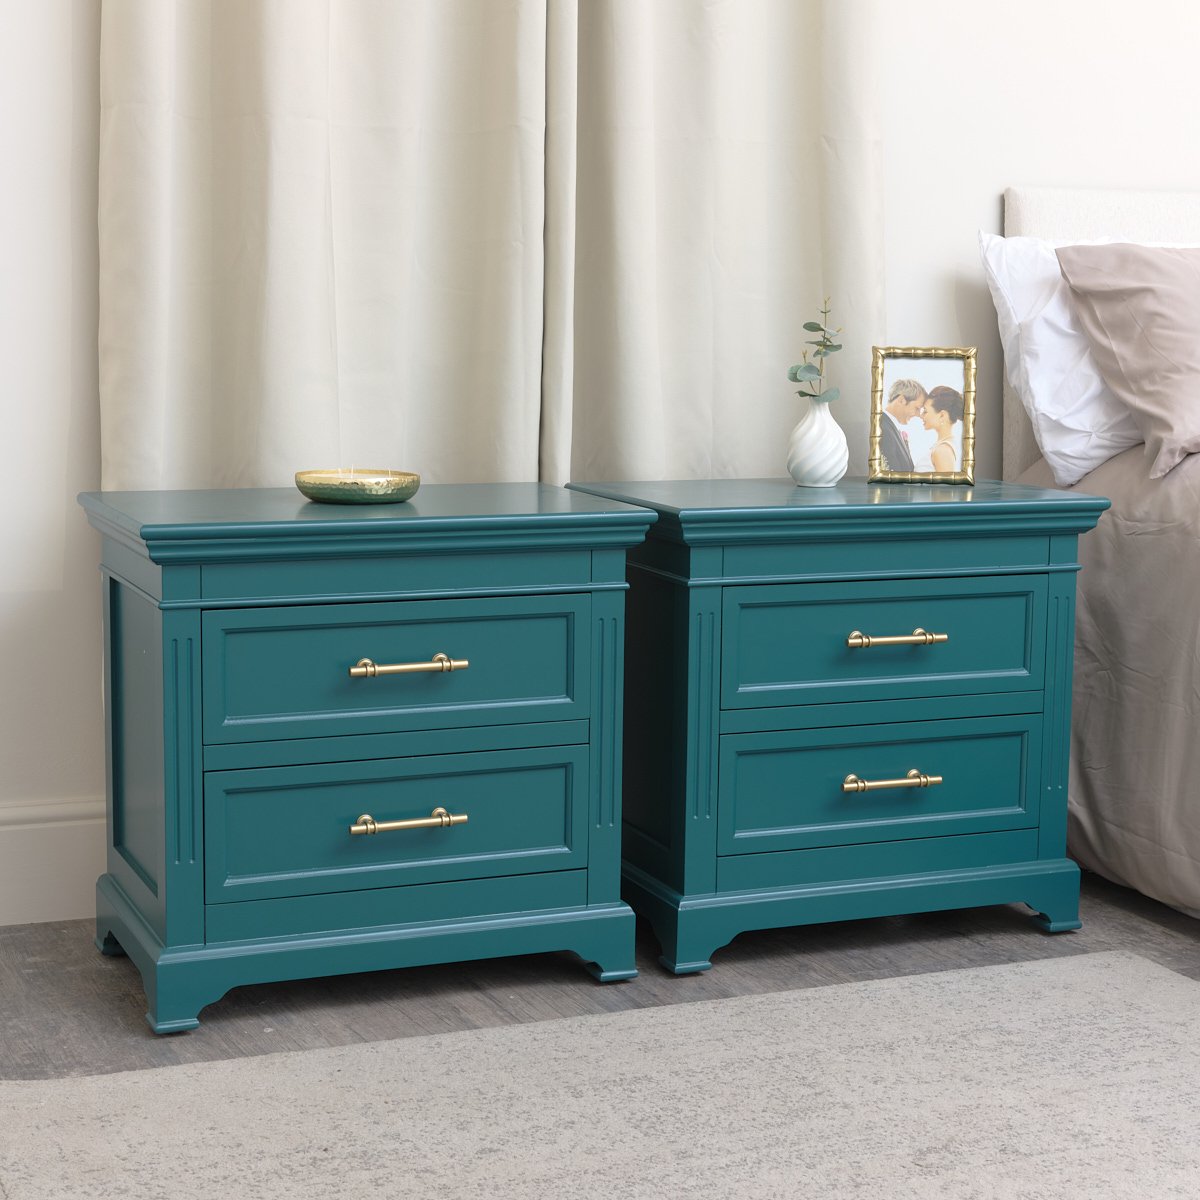 Pair of 2 Drawer Large Teal Bedside Tables